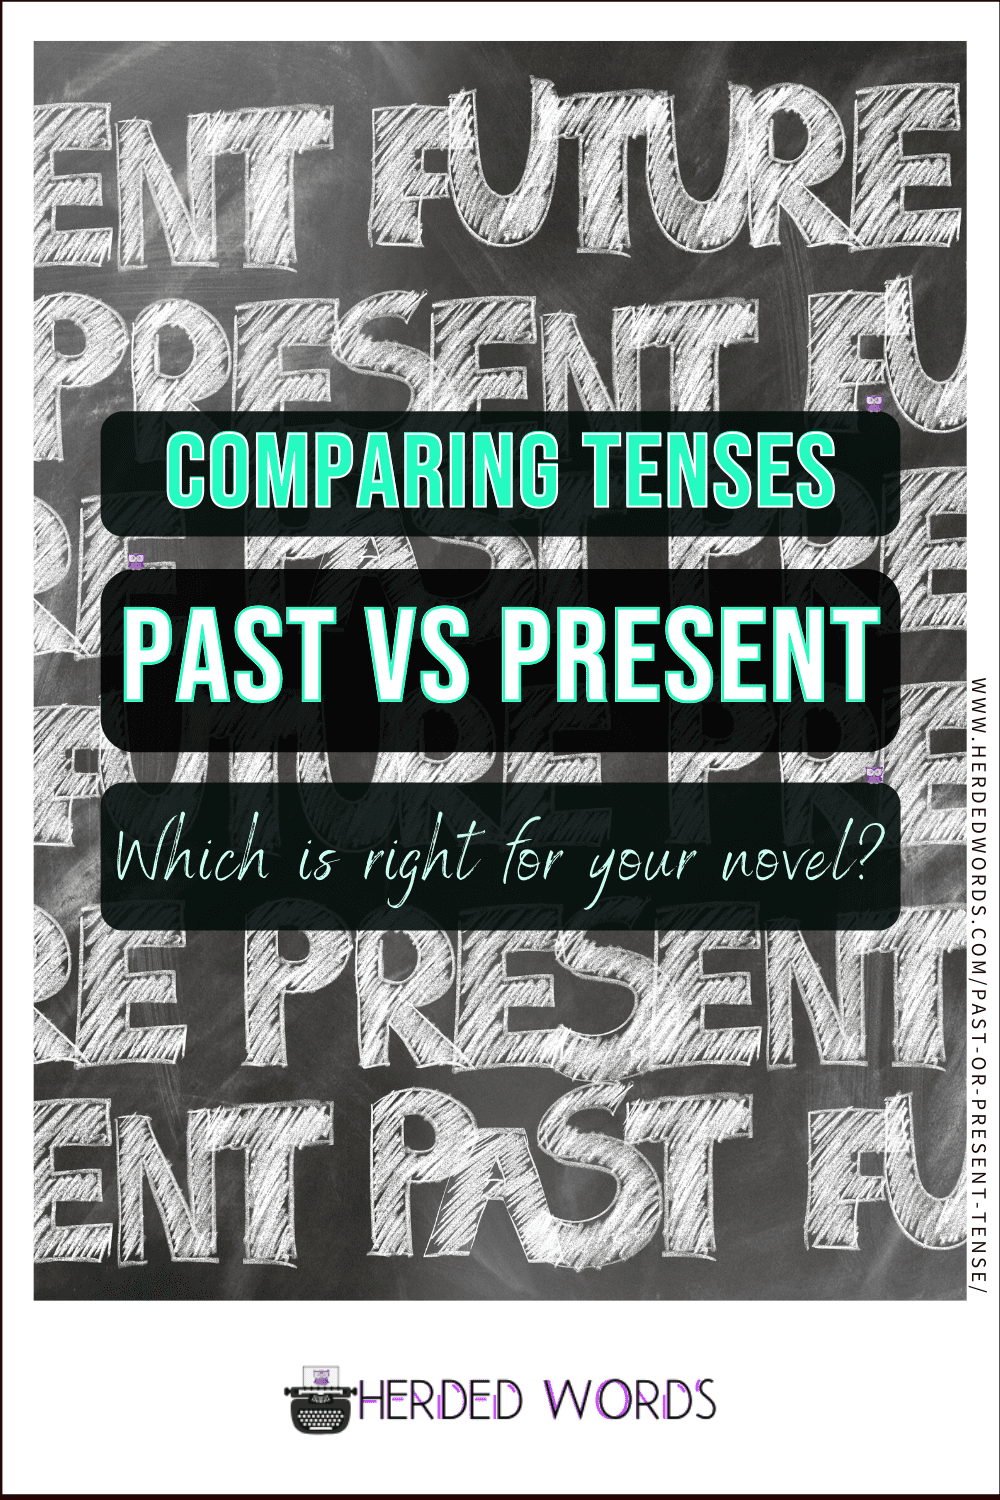 Image link to comparing tenses: Past vs Present. Which is right for your novel?